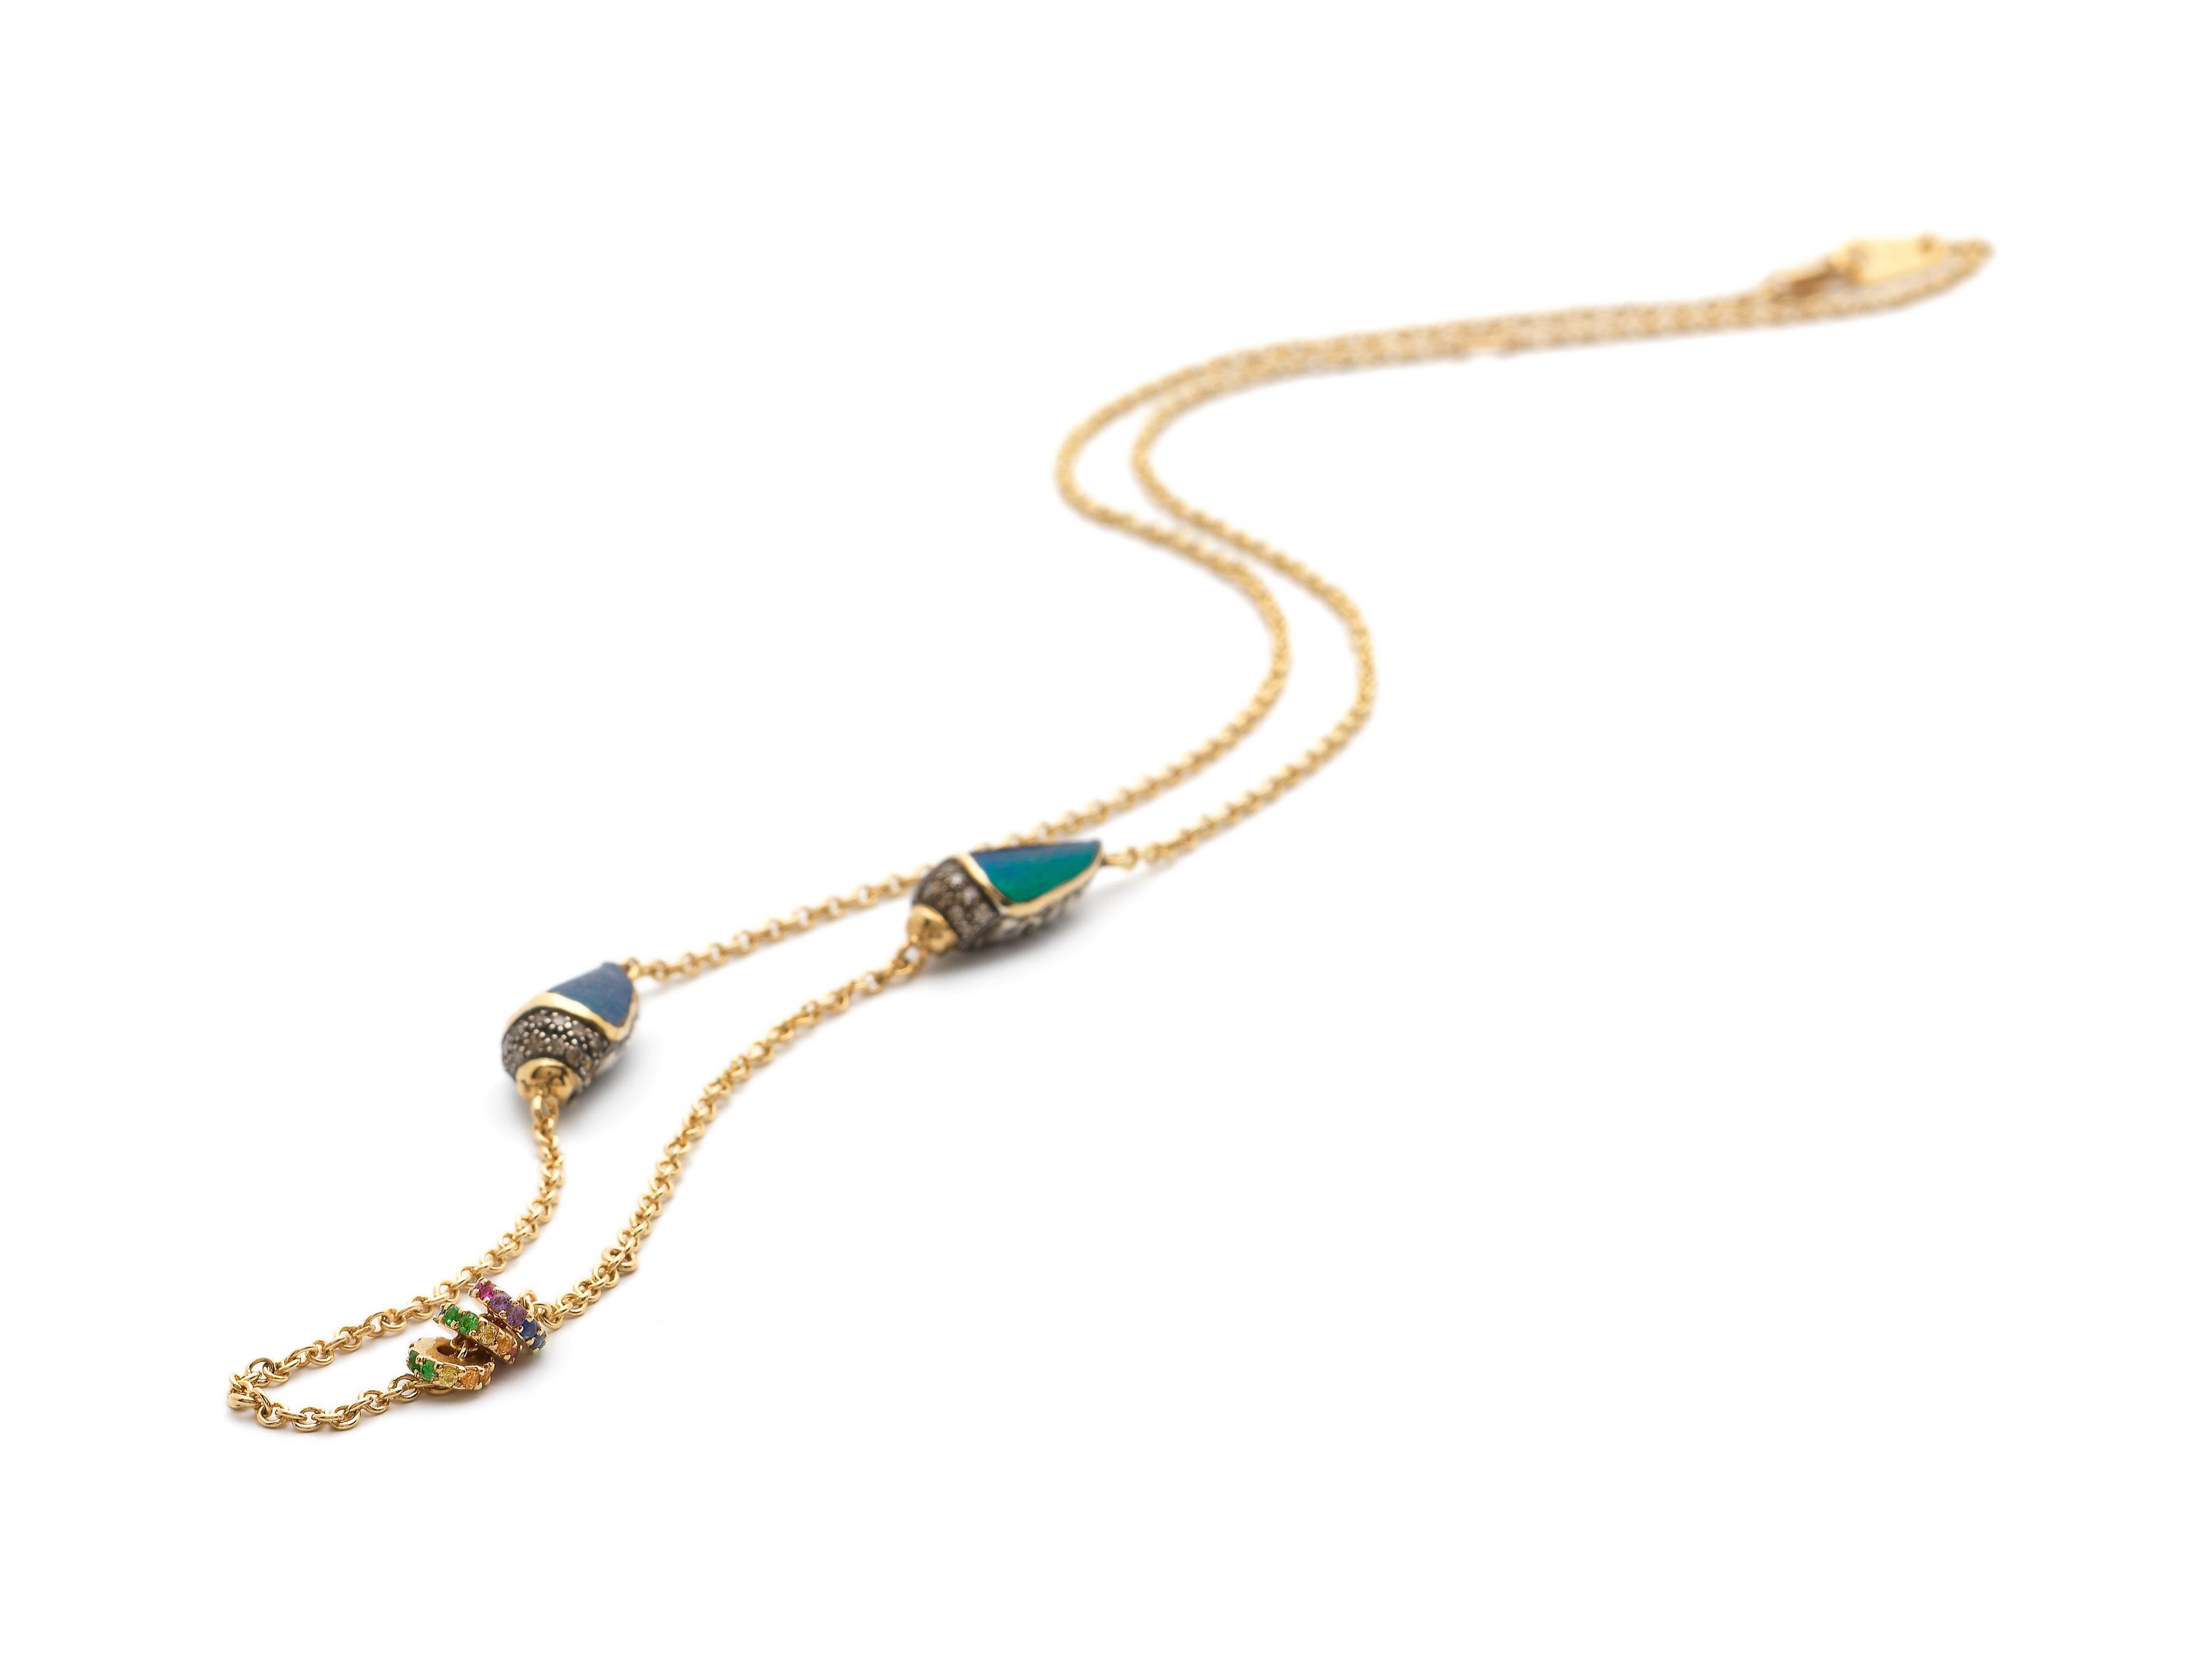 

This necklace sits like a second skin on the collarbone. The piece is designed as a fine, 18k yellow gold chain on which sit two sterling silver scarabs, set with real scarab wings and embellished with brown diamonds, tsavorites, and